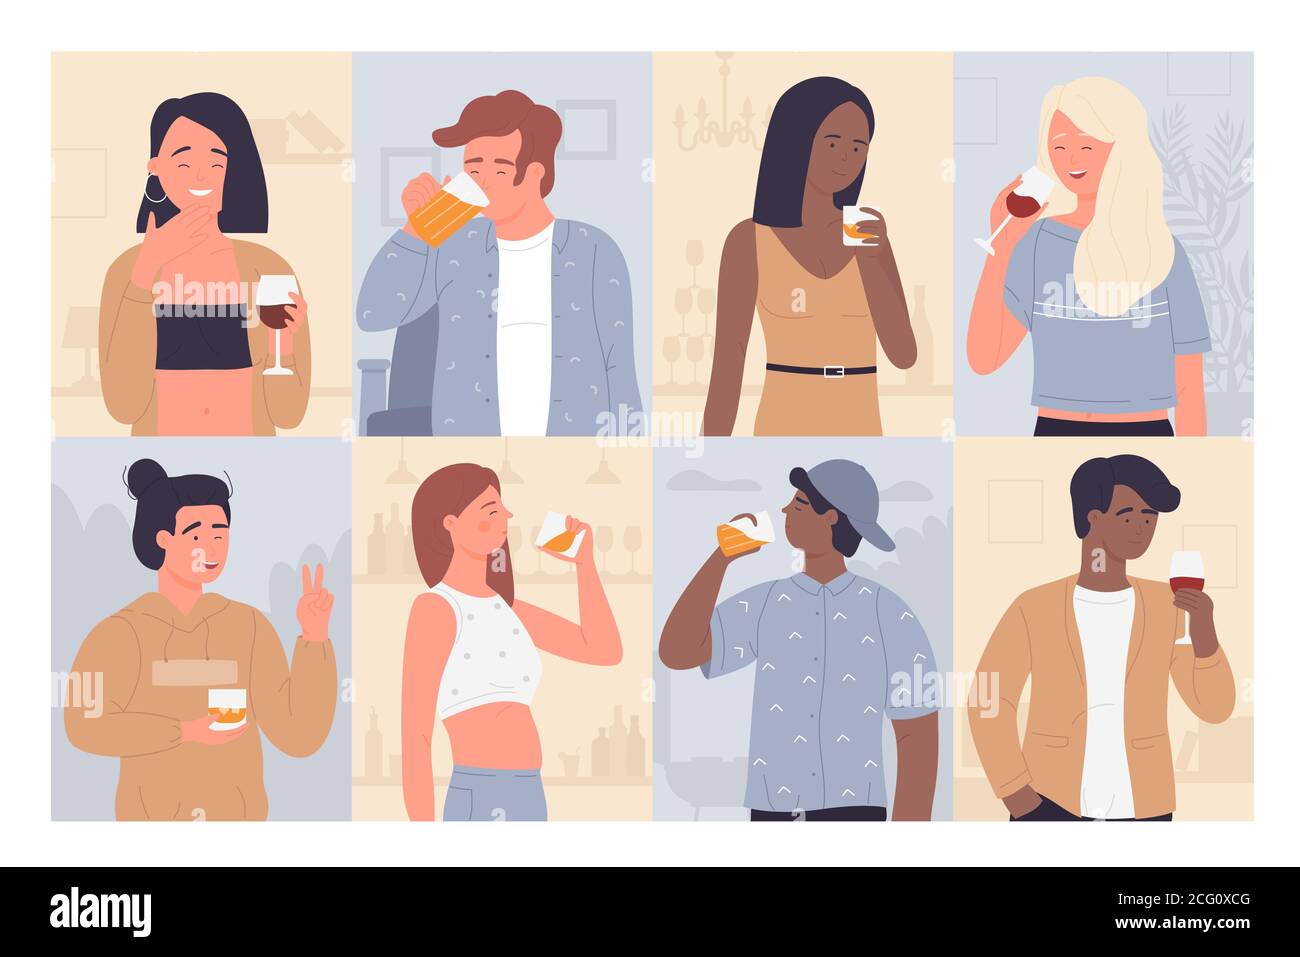 Drinking people vector illustration set. Cartoon flat adult man woman characters drink alcoholic beverage, young happy girl and guy standing with glass of wine, beer at party collection background Stock Vector